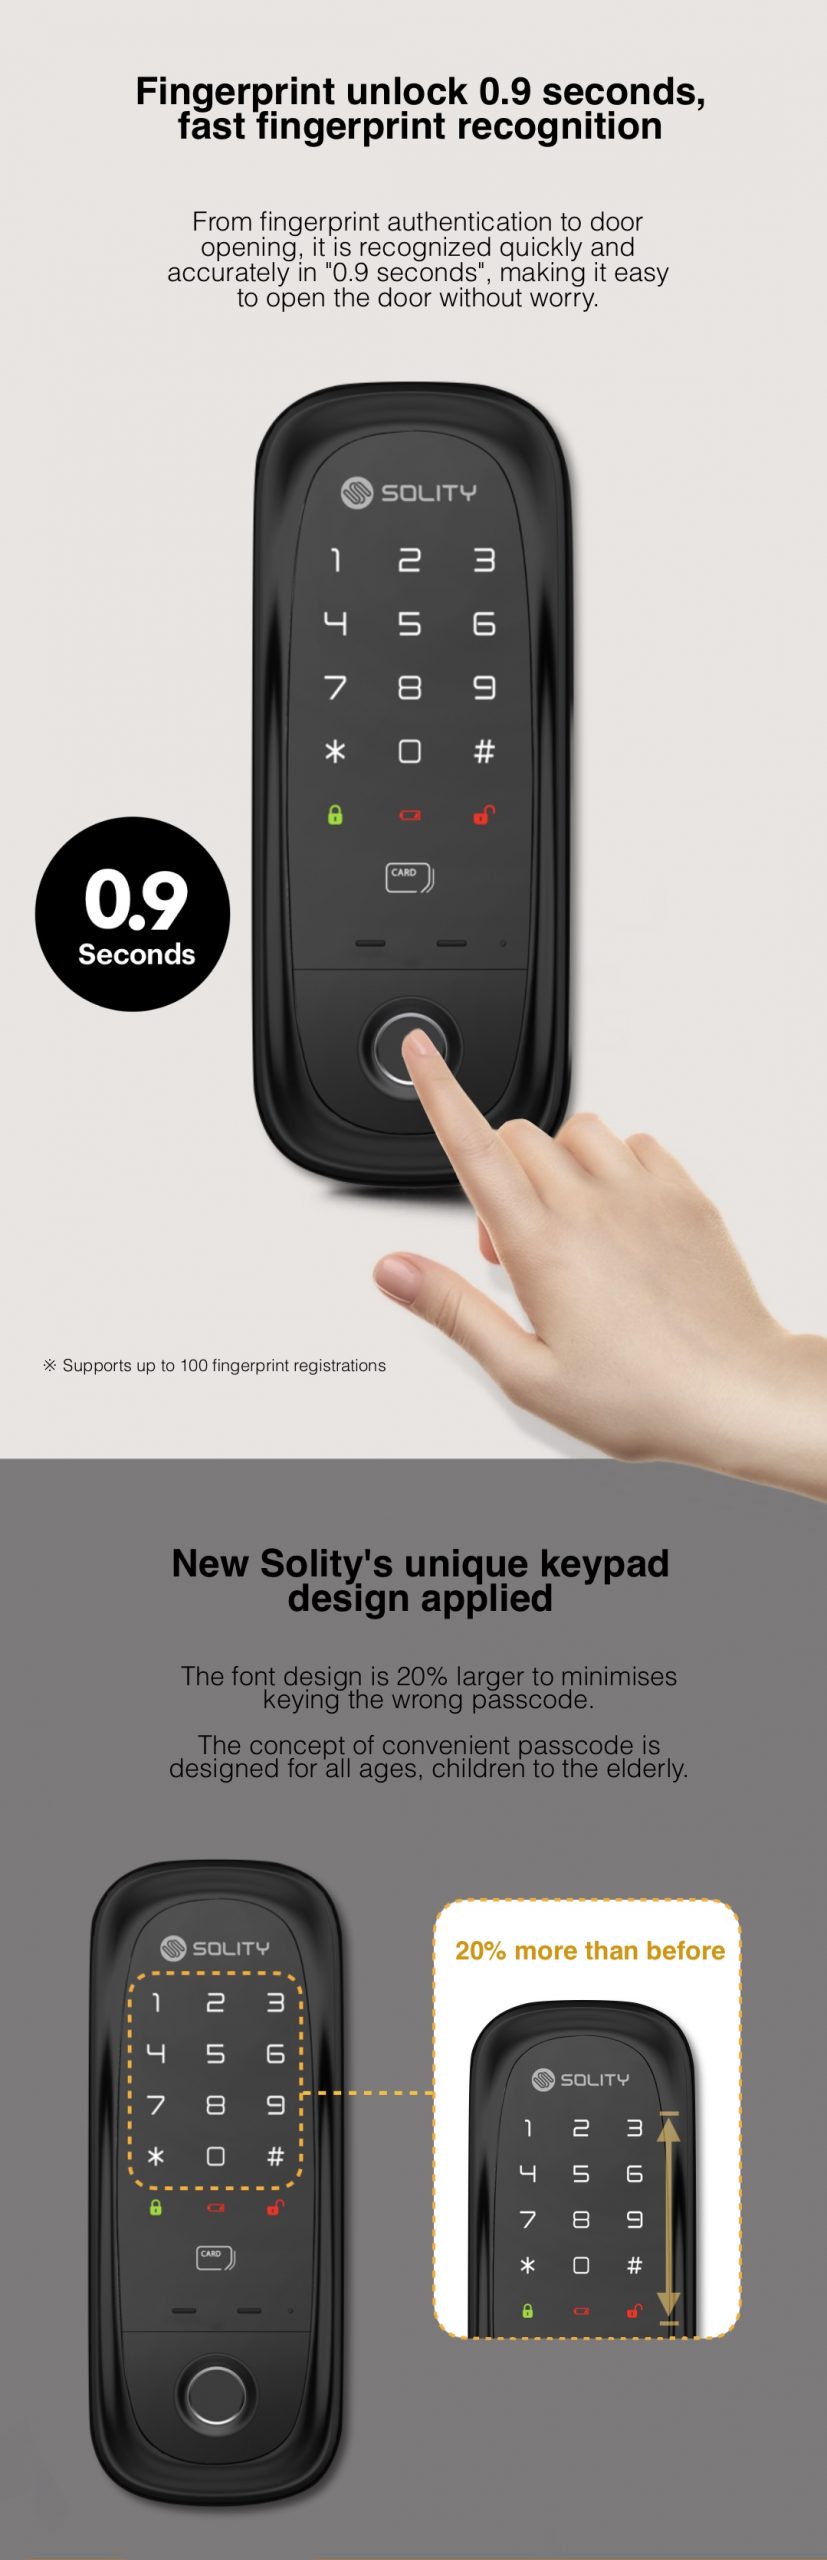 Shows fast fingerprint identification of 0.9s and also elderly friendly size of lit numbers on the numeric input pad of Solity GA-65B rim digital door lock